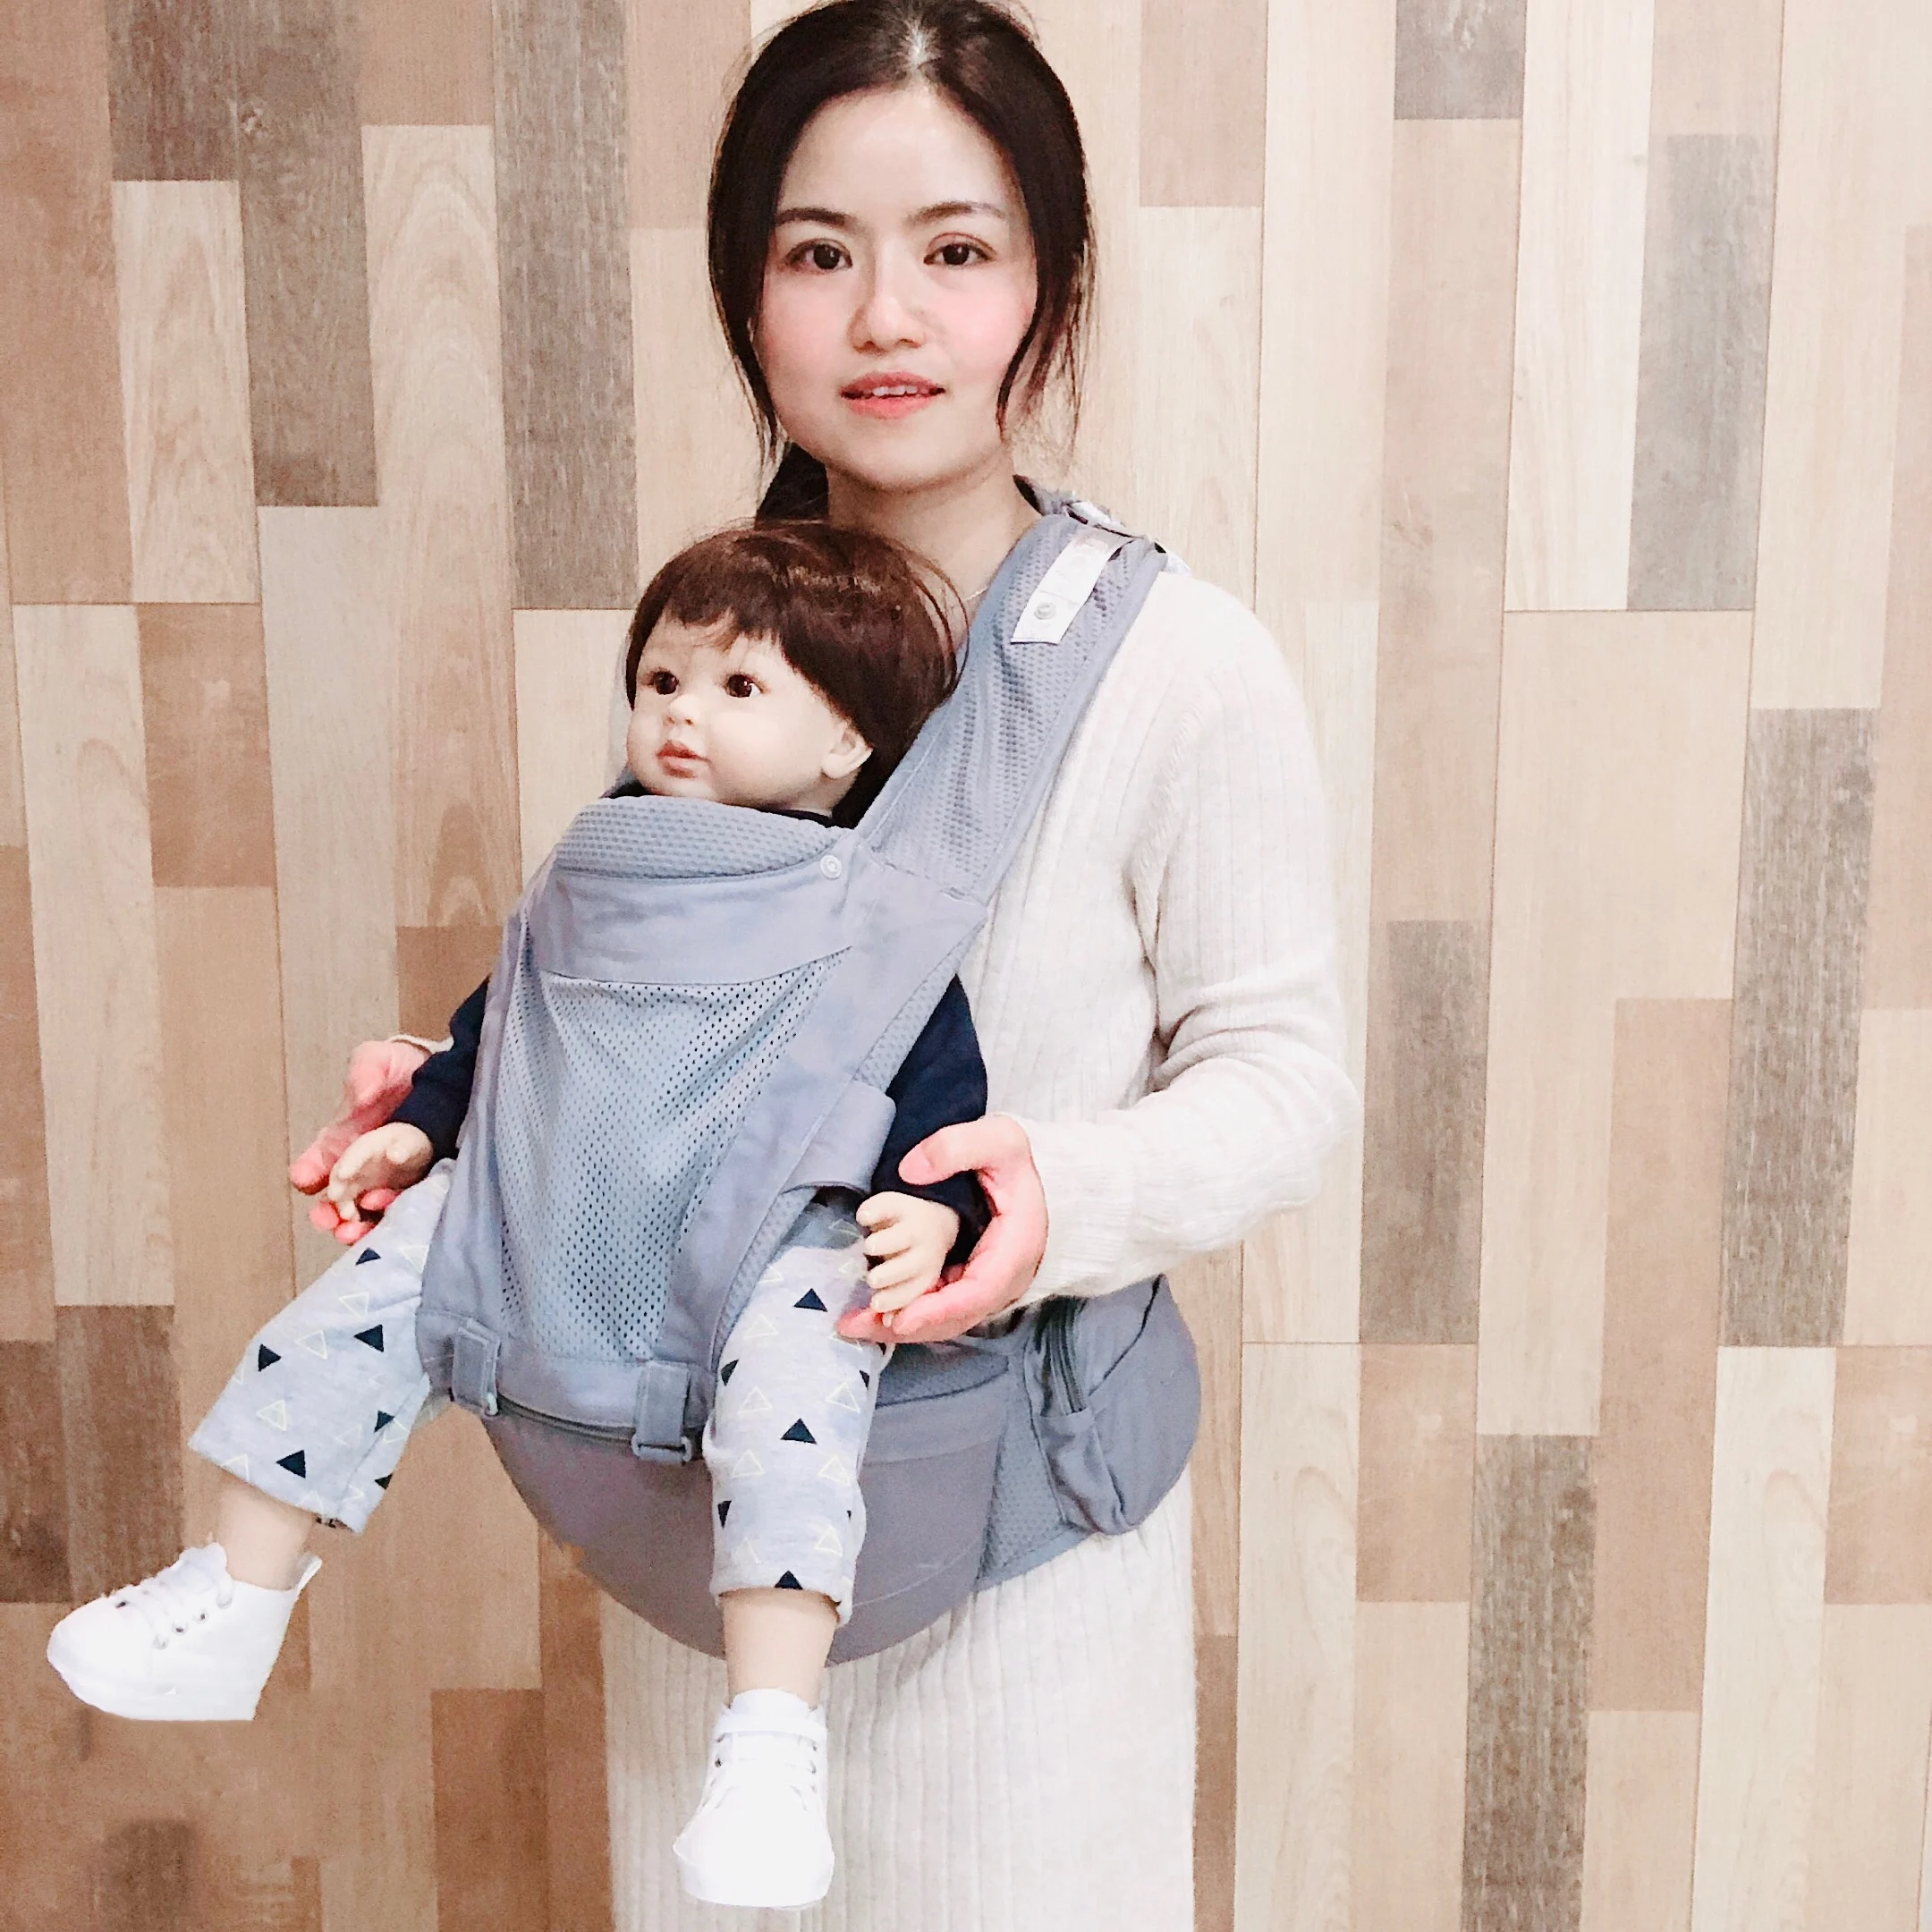 Baby Carrier for Newborn Infant Carrier Toddler Carrier Front and Back with Hip Seat Hood Soft & Breathable Cotton Air Mesh 